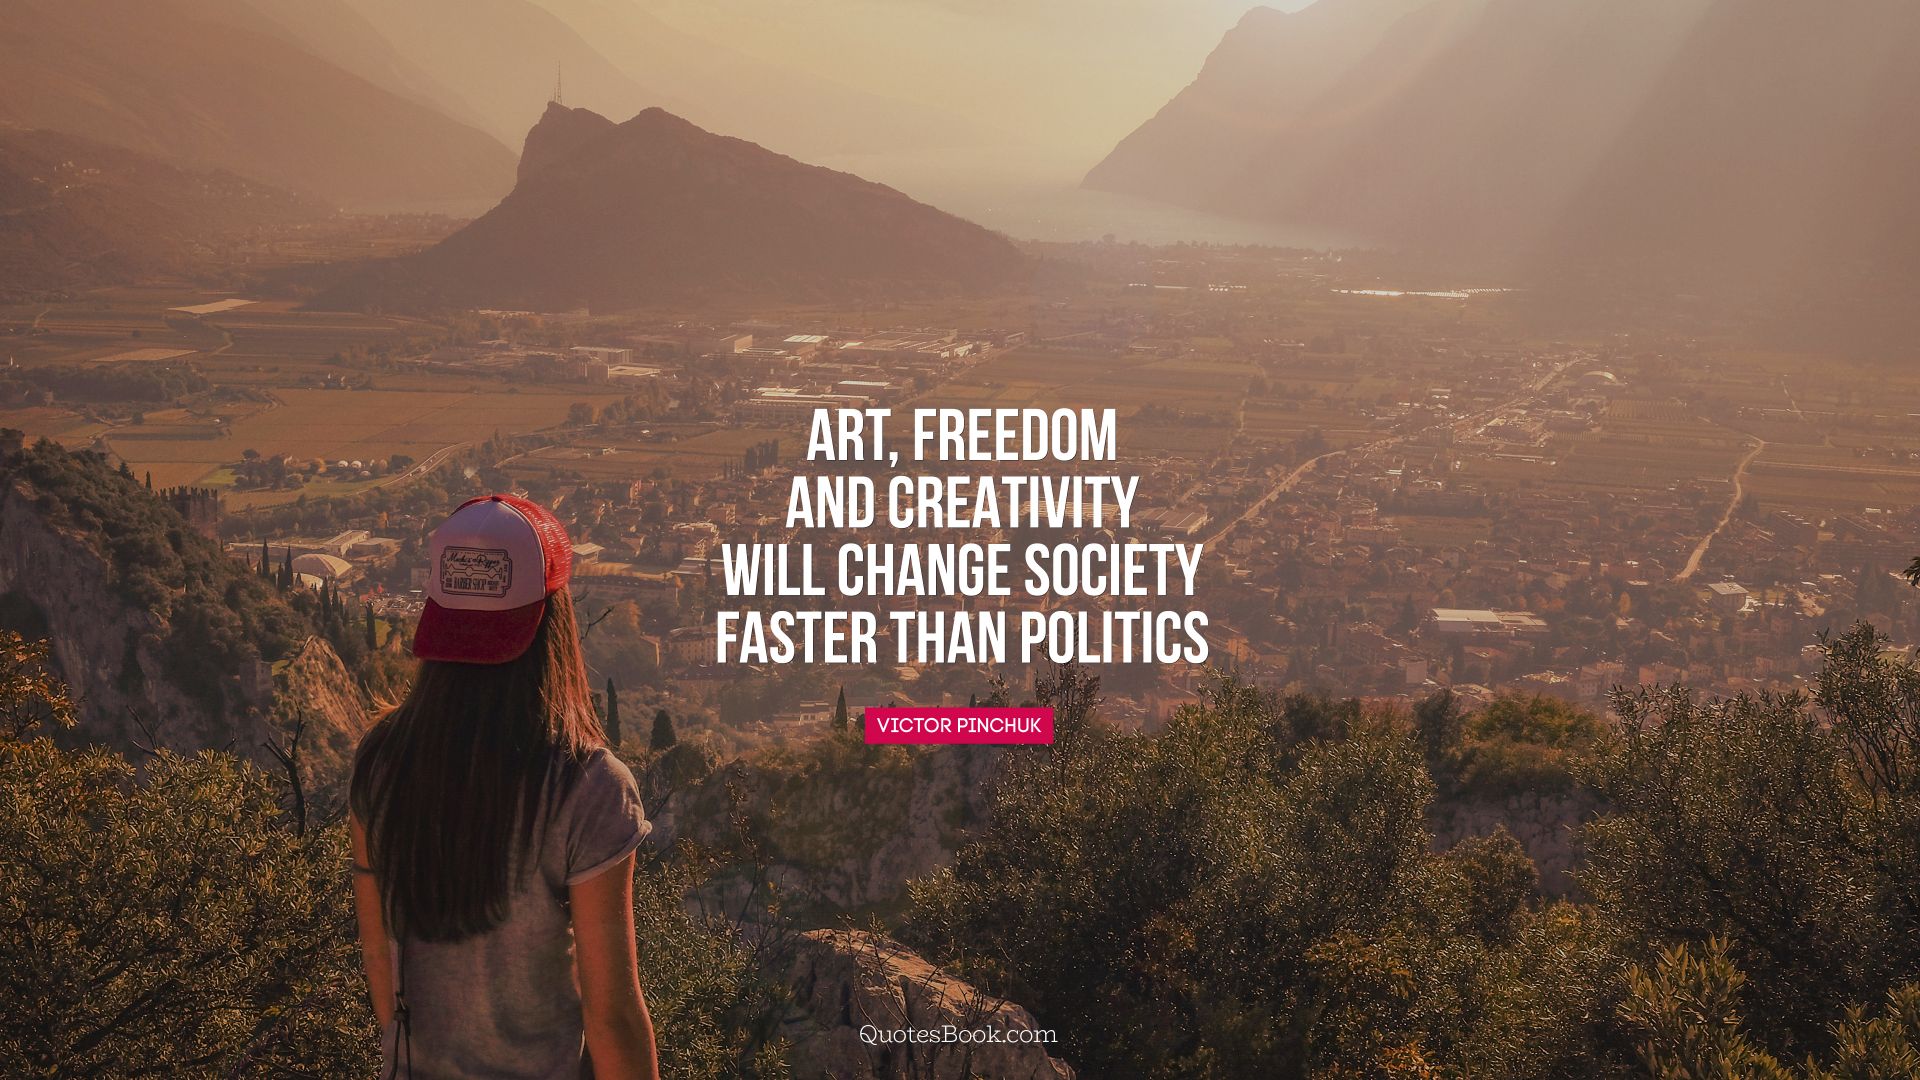 Art, freedom and creativity will change society faster than politics